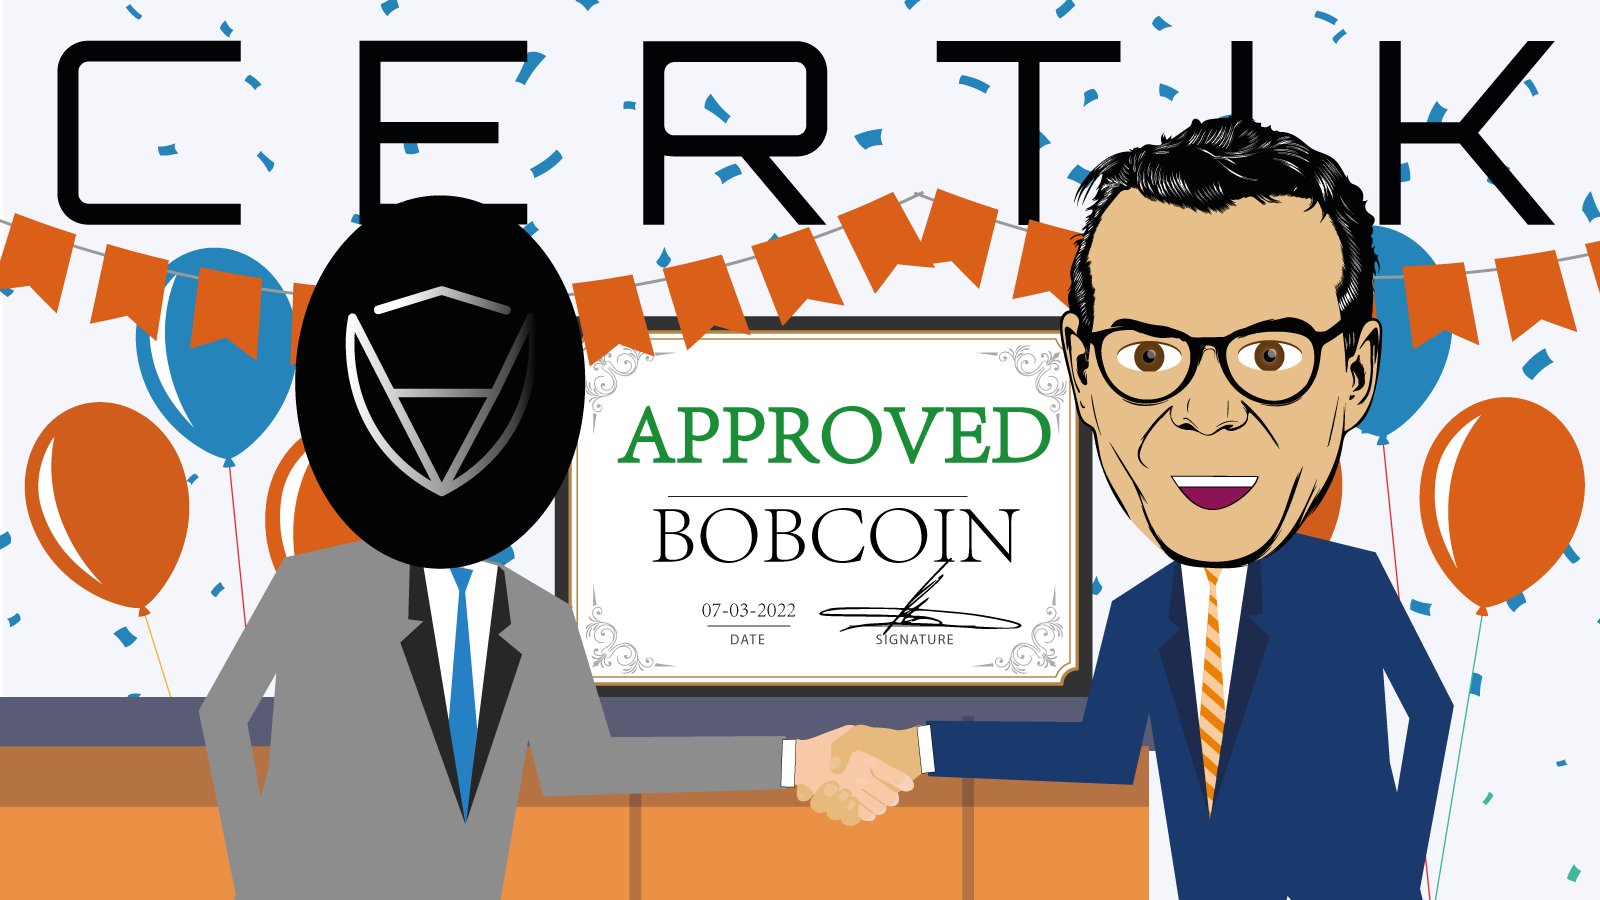 Breaking - Bobcoin is officially approved for AAA exchanges!